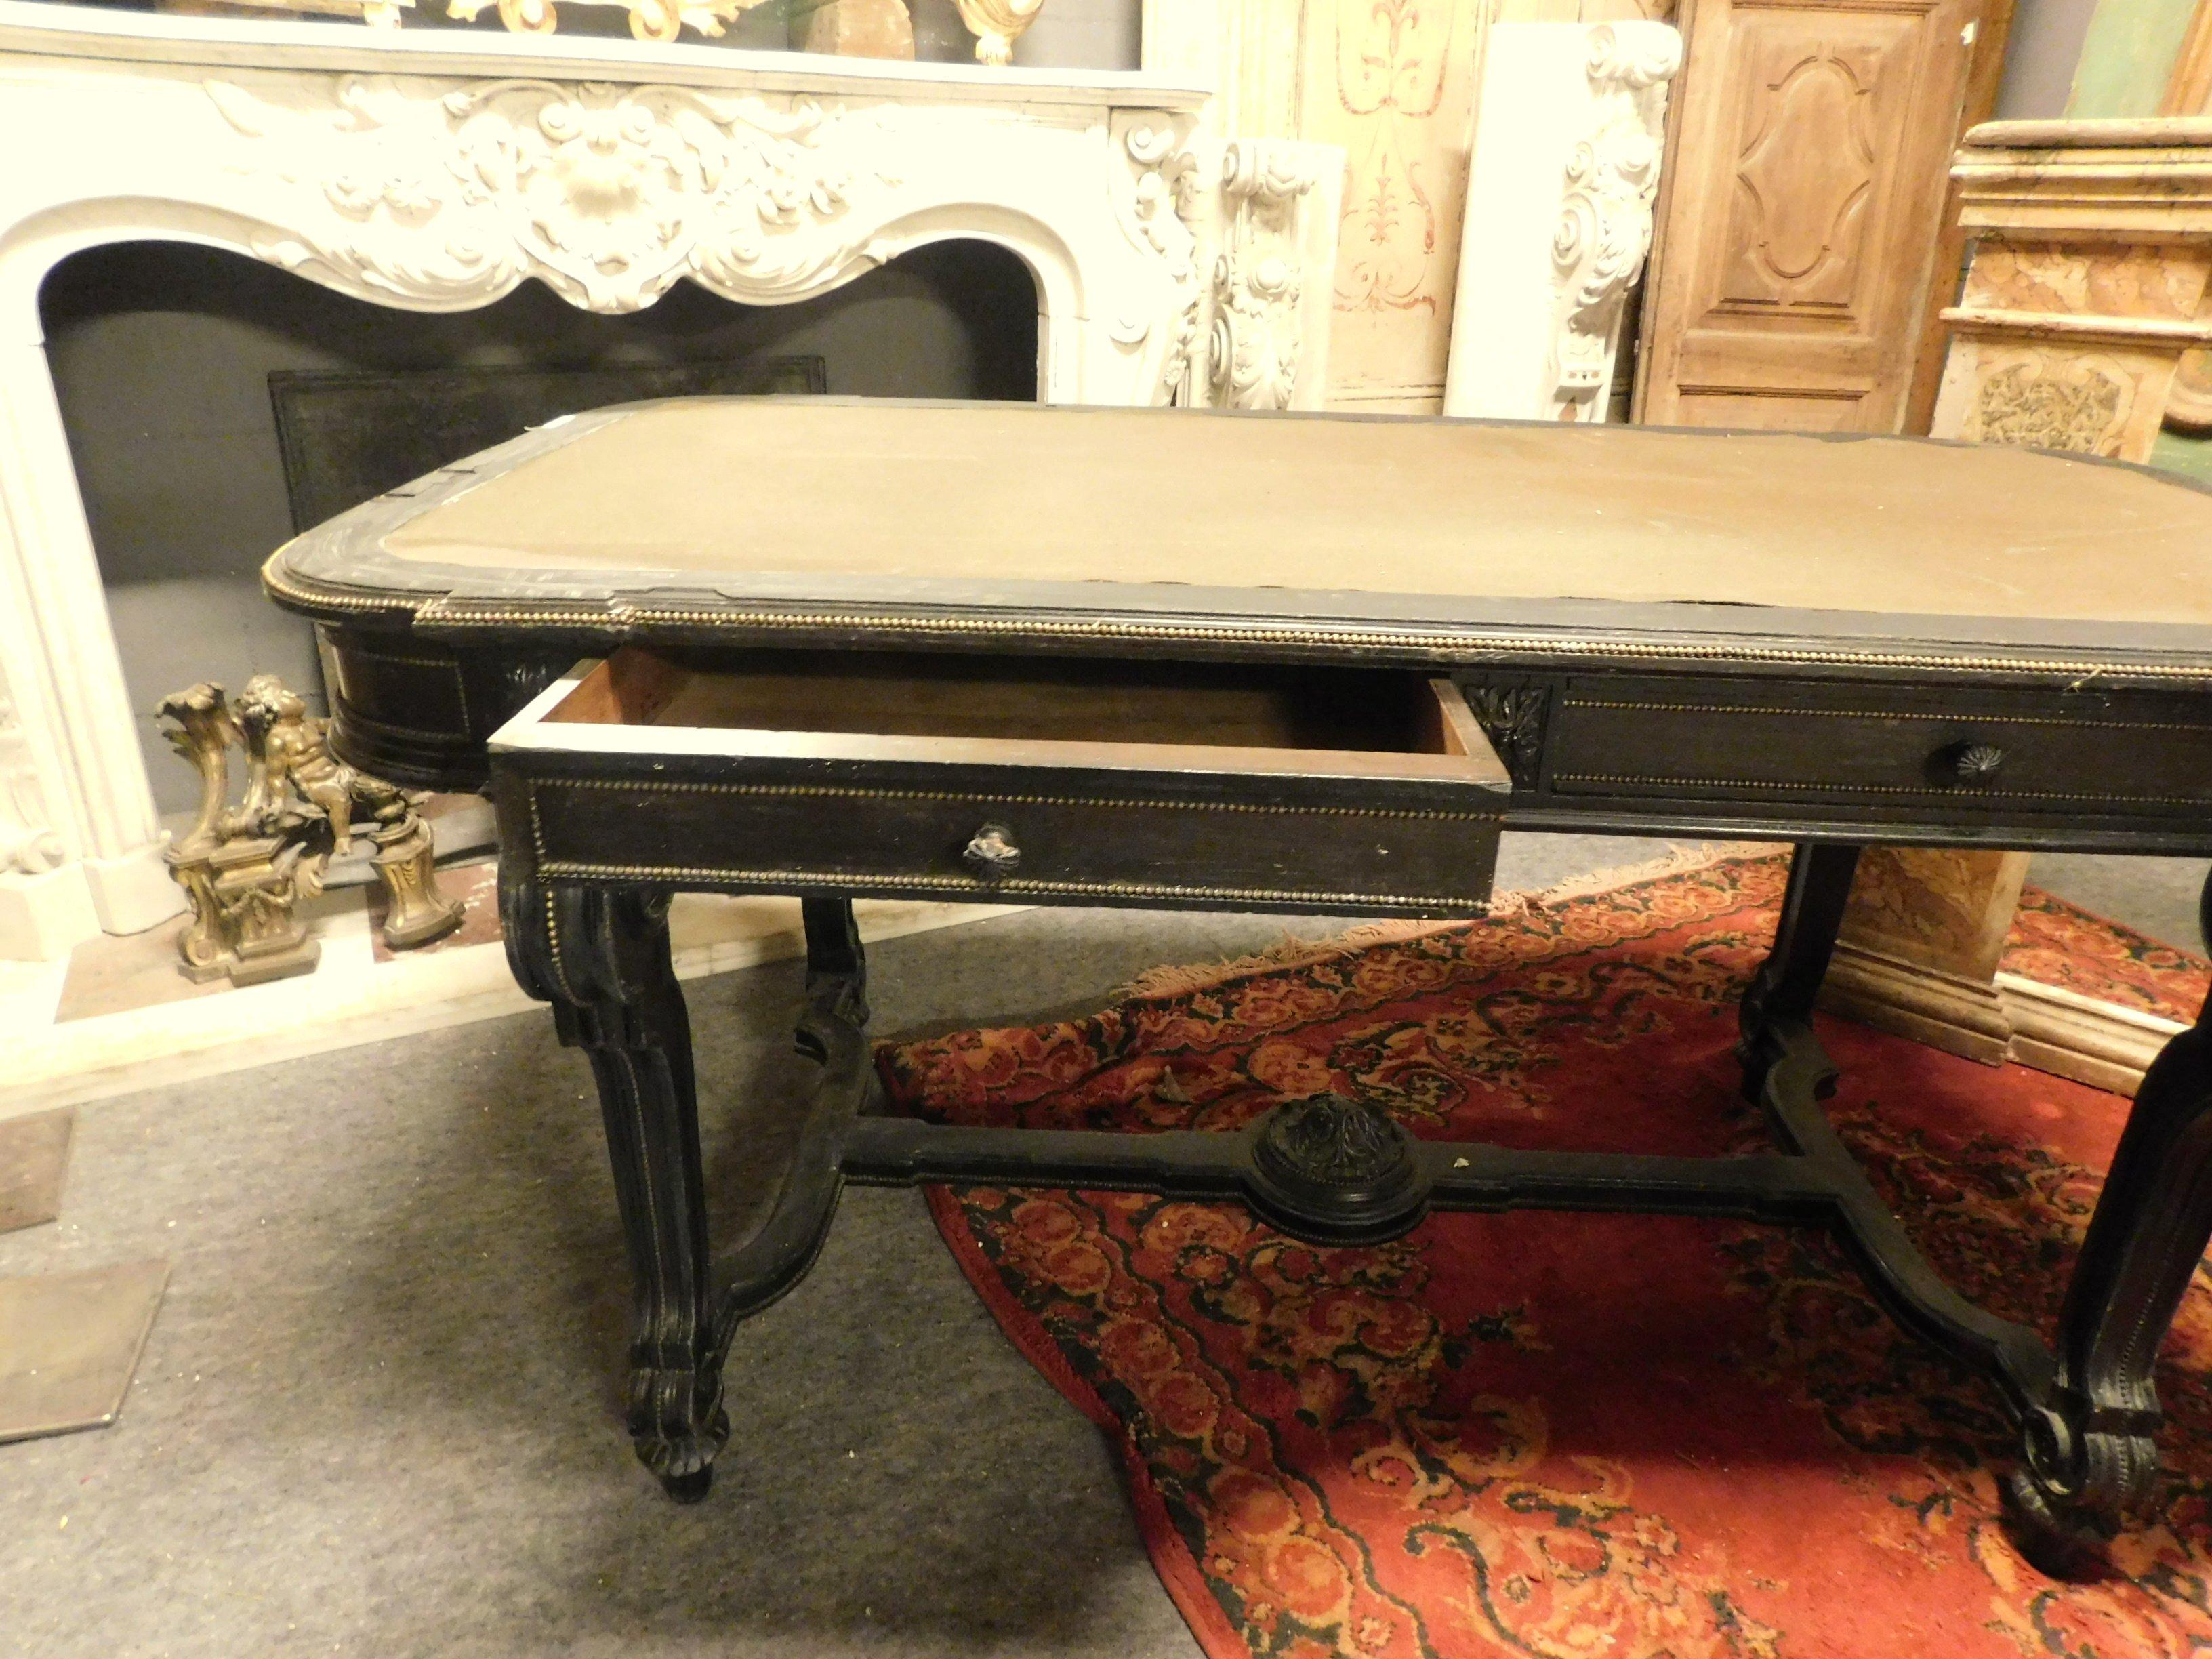 Italian Antique Writing Table in Black Lacquered Wood, Leather and Drawers, 1800, Italy